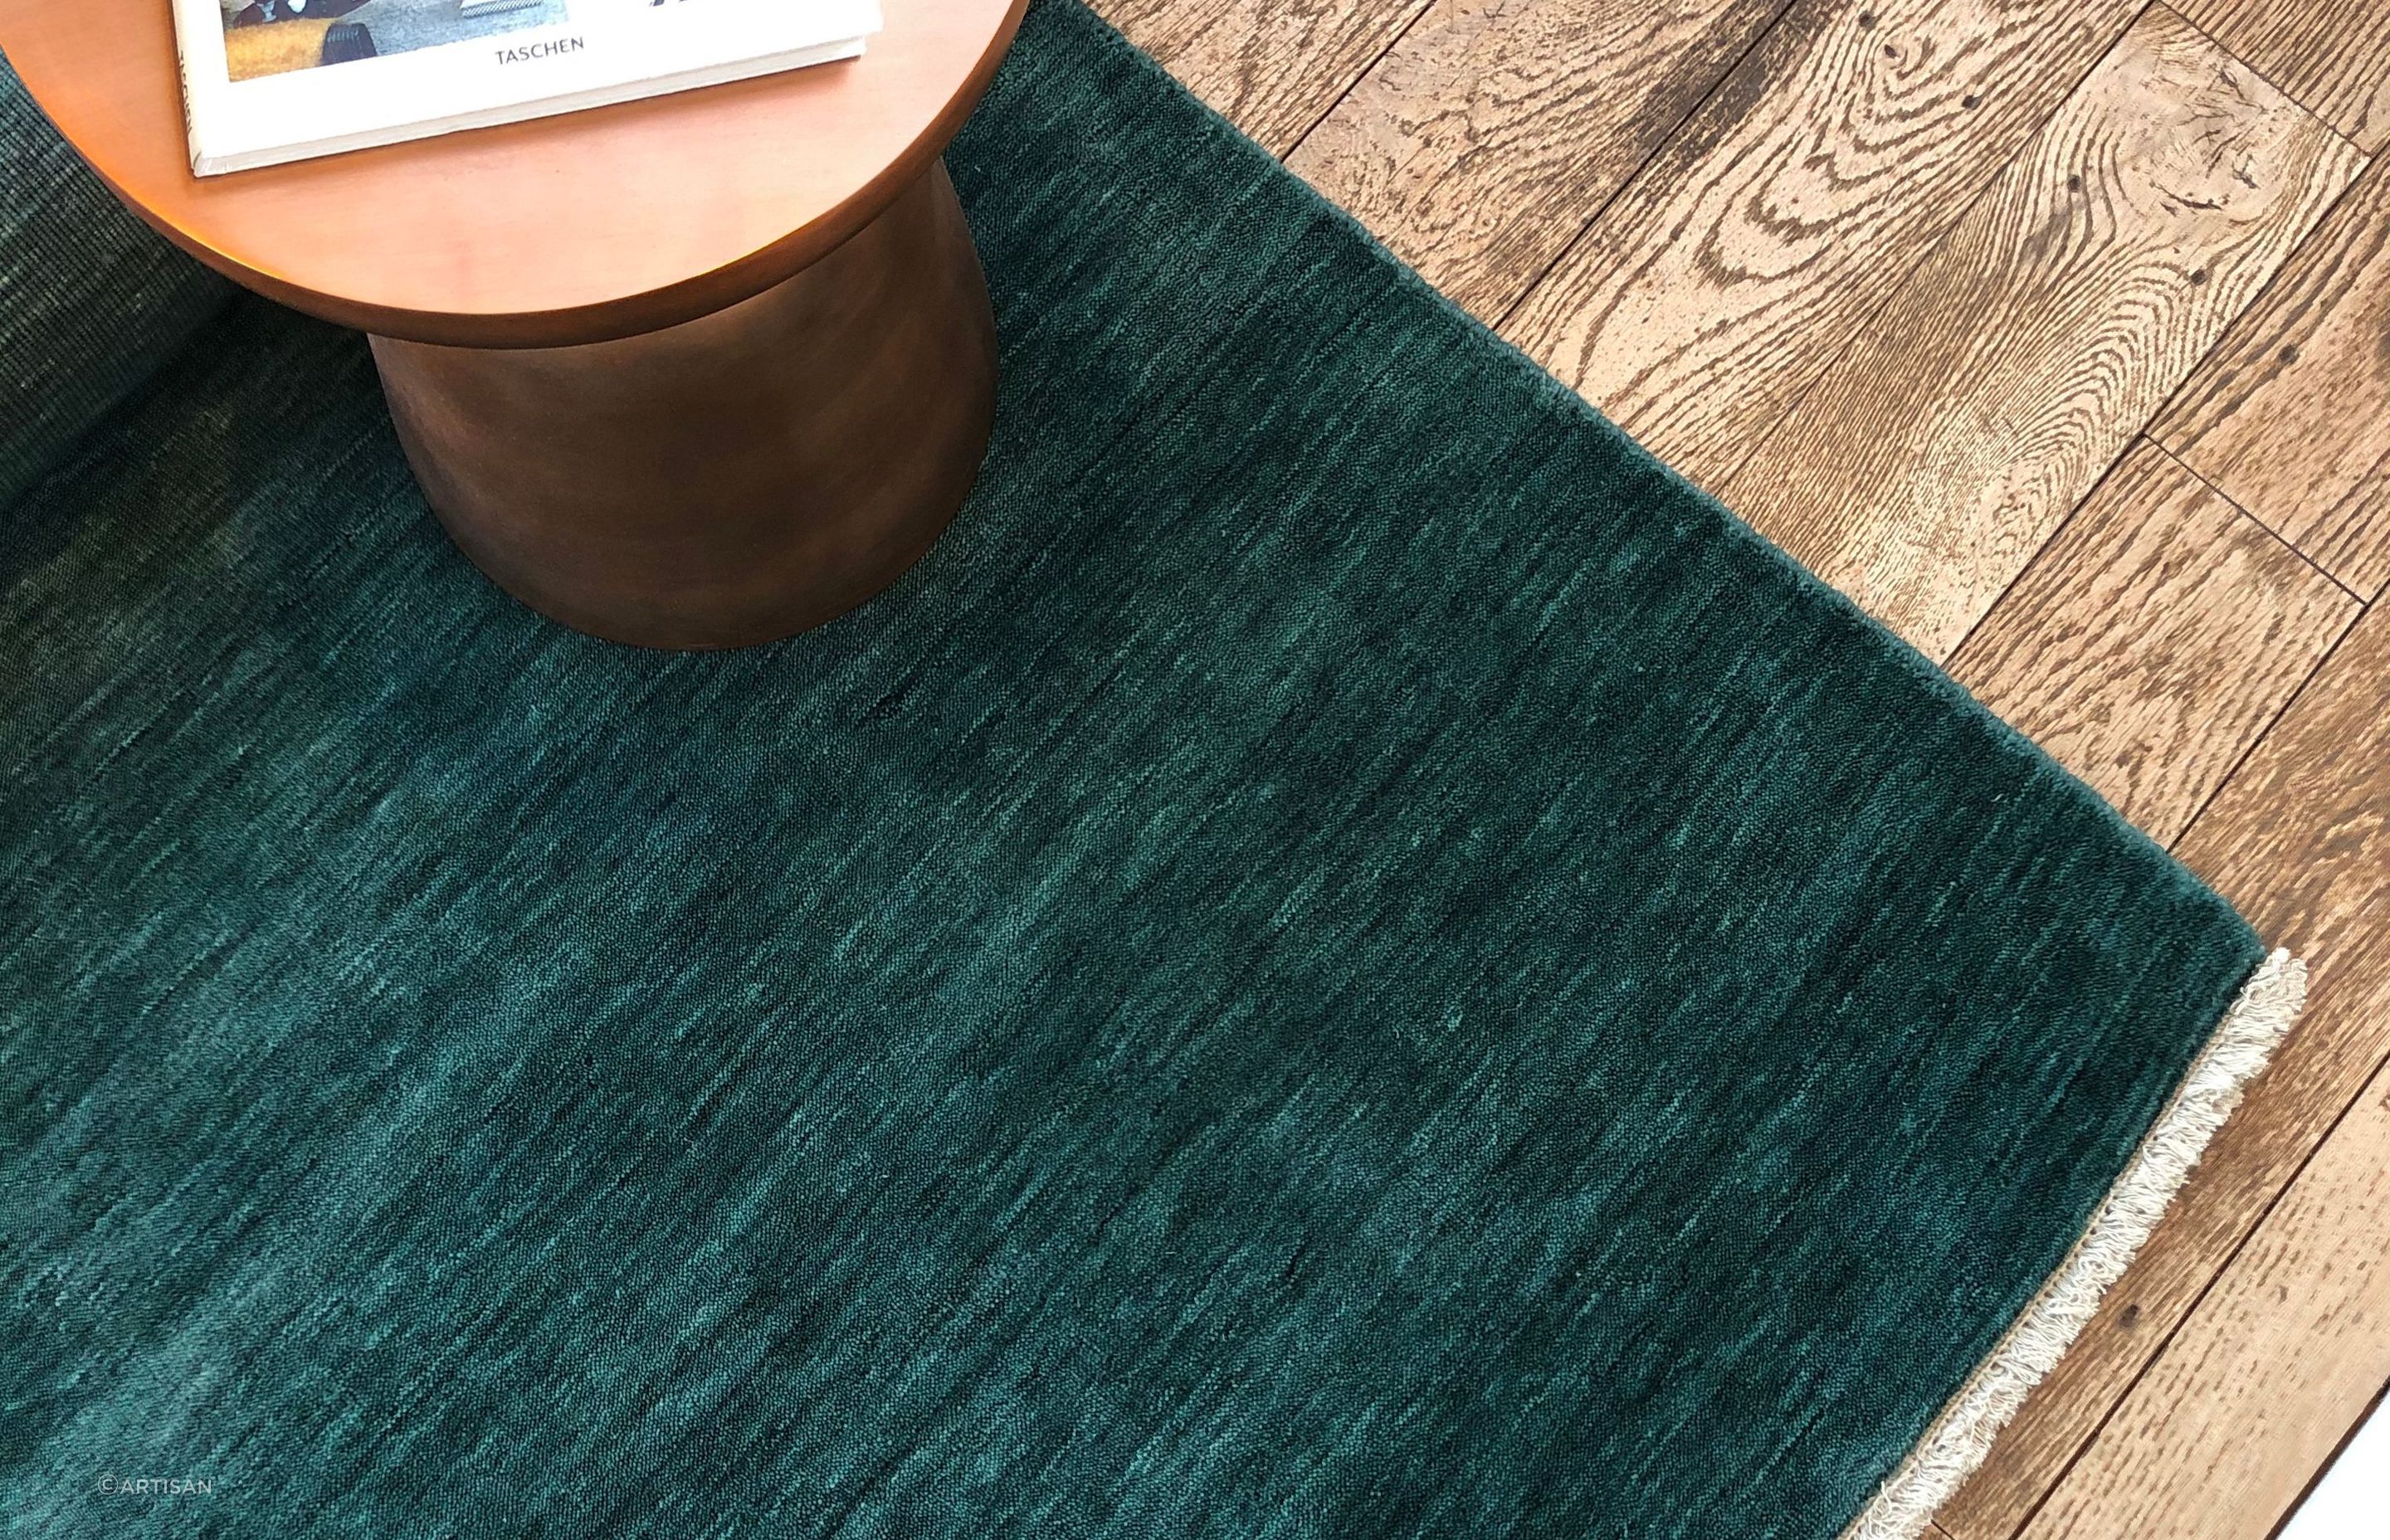 The Sencillo Emerald washes a space with depth and intrigue.